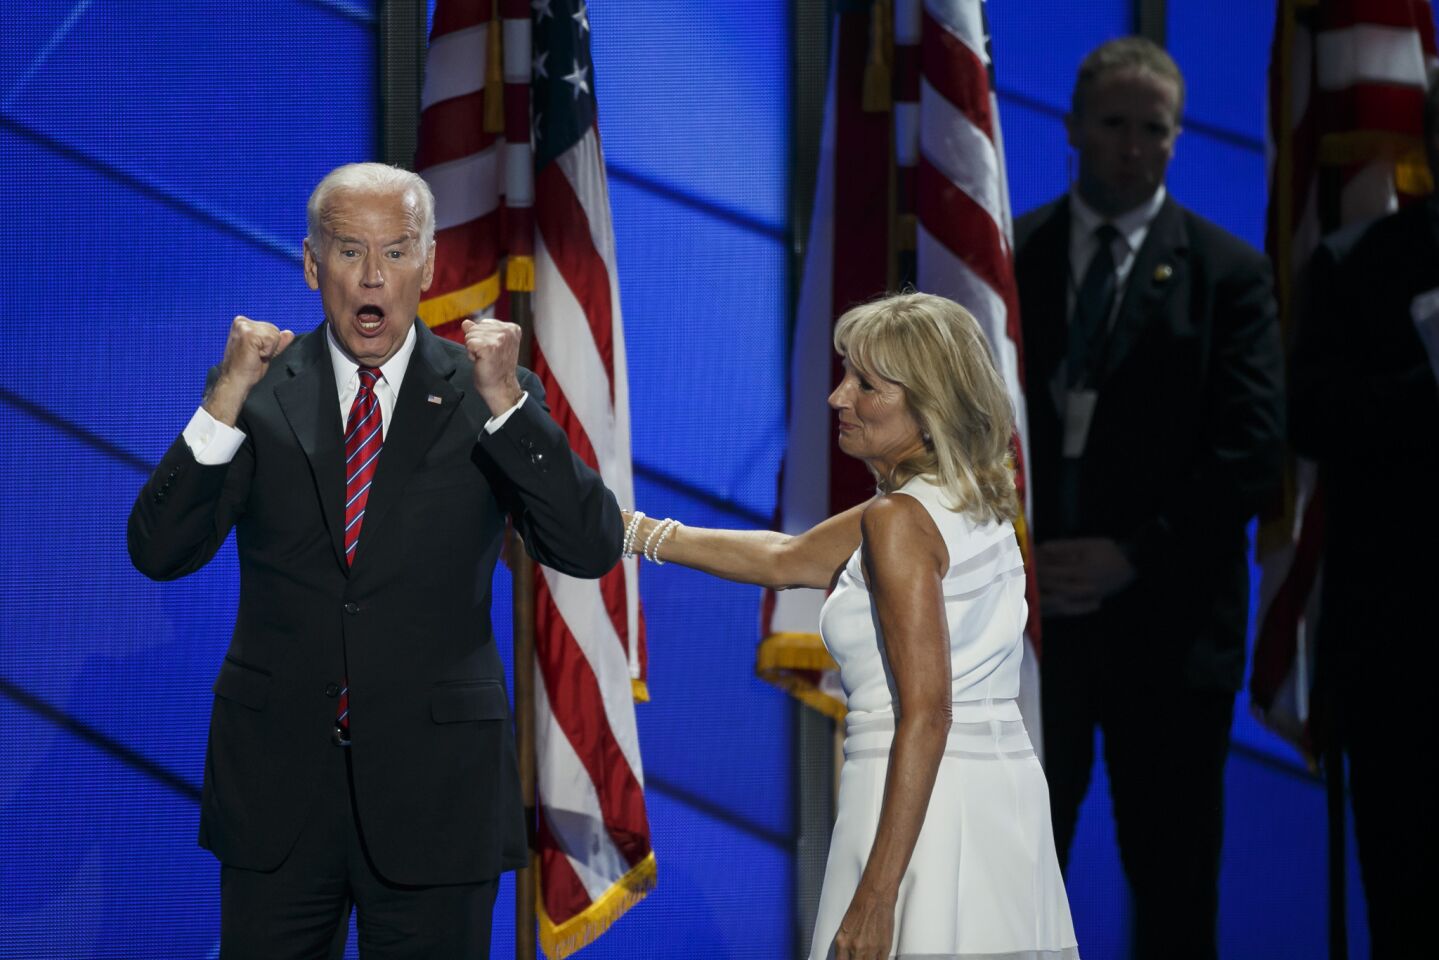 Vice President Joe Biden and his wife, Jill, exit the stage.